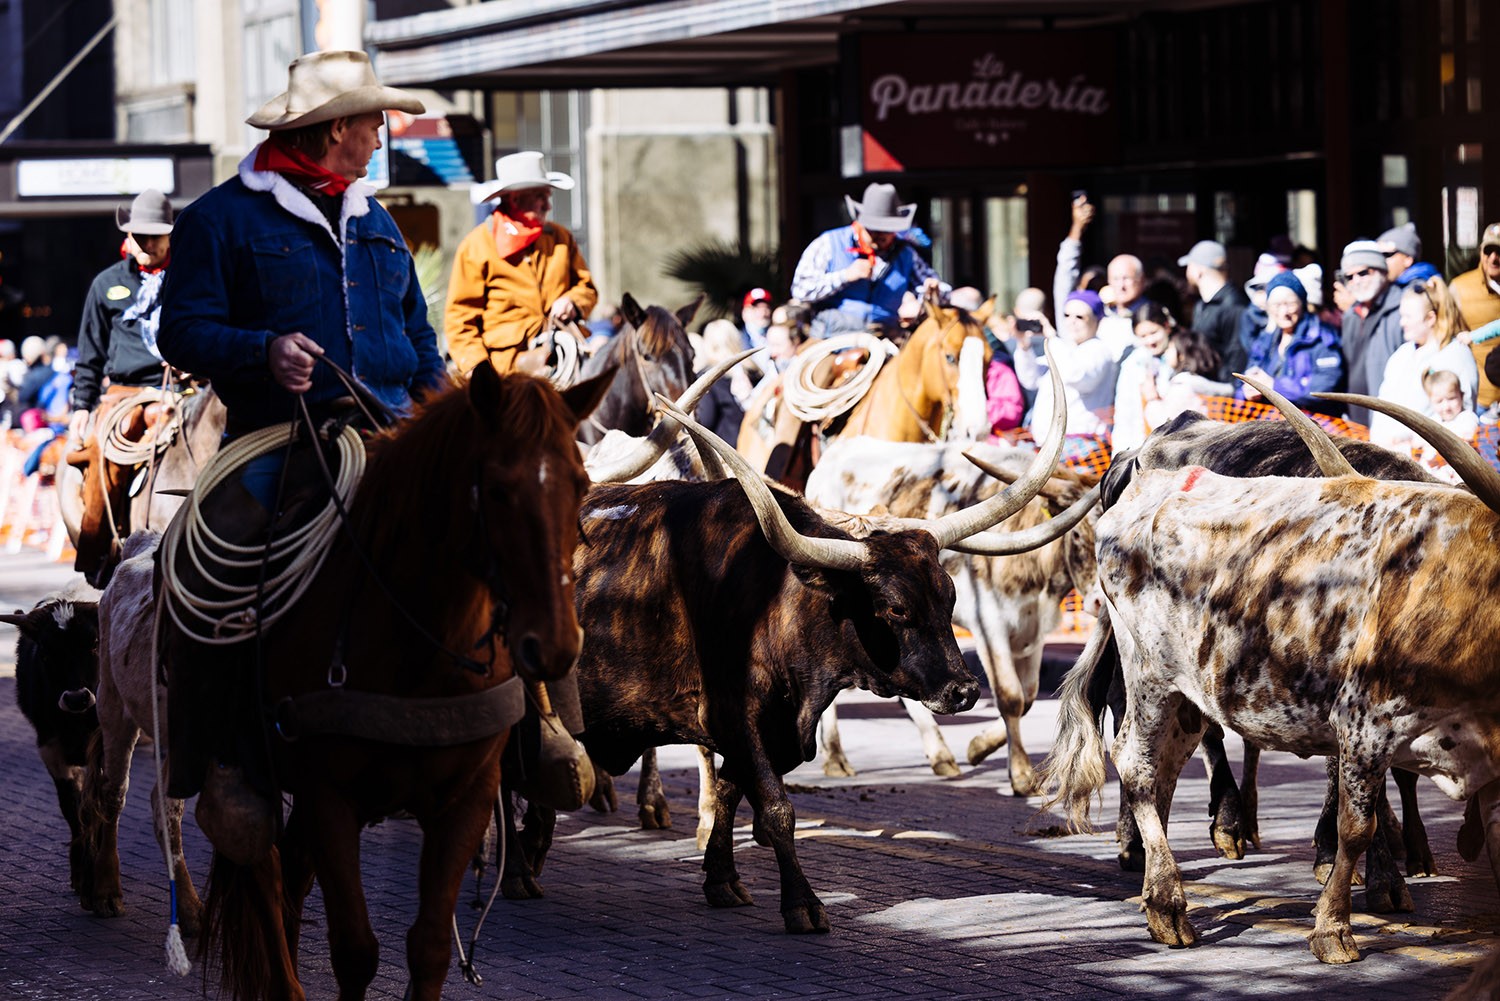 The annual Western Heritage Parade & Cattle Drive takes place on Houston Street in downtown San Antonio, Texas, on Feb. 5, 2022. Photo by Chris Stokes | Heron contributor